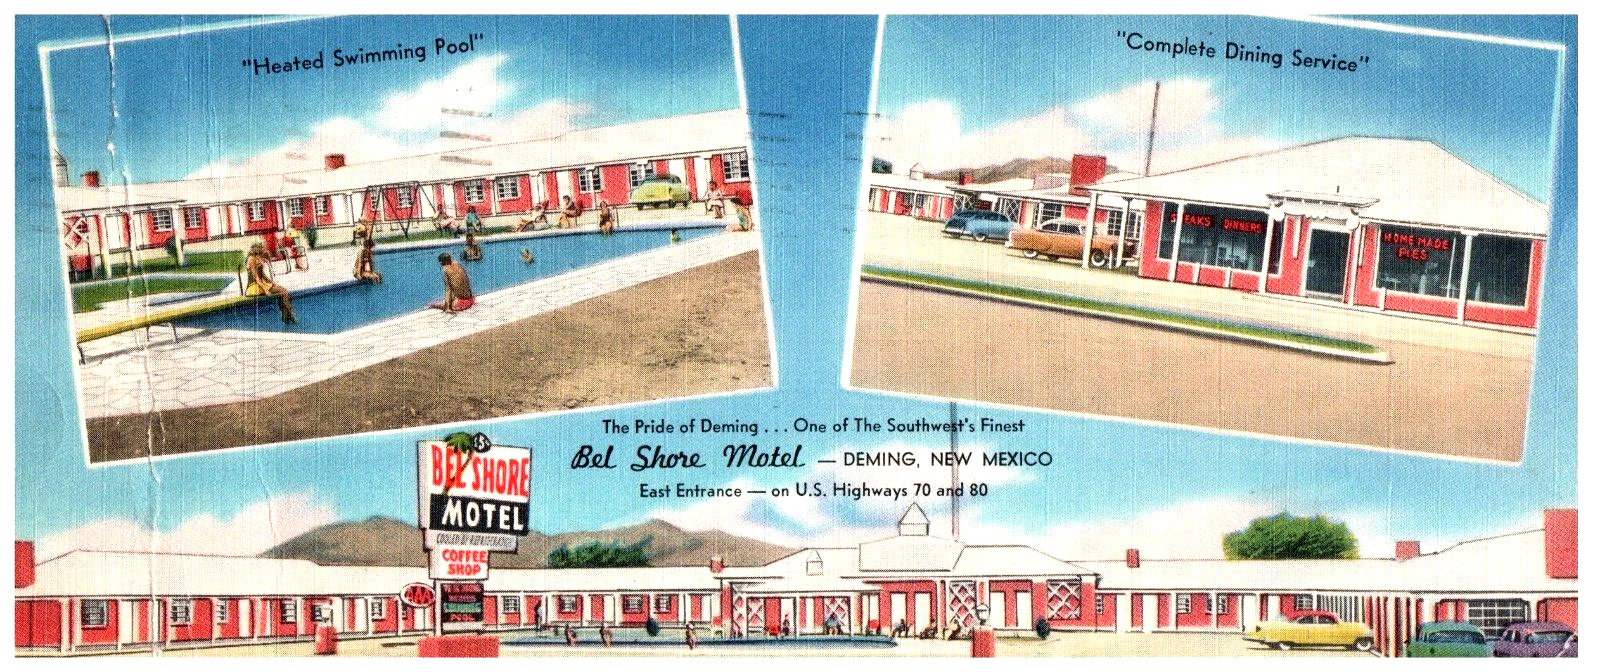 Deming New Mexico Bel Shore Motel & Cafe Coffee Shop Vtg NM Advertising Postcard